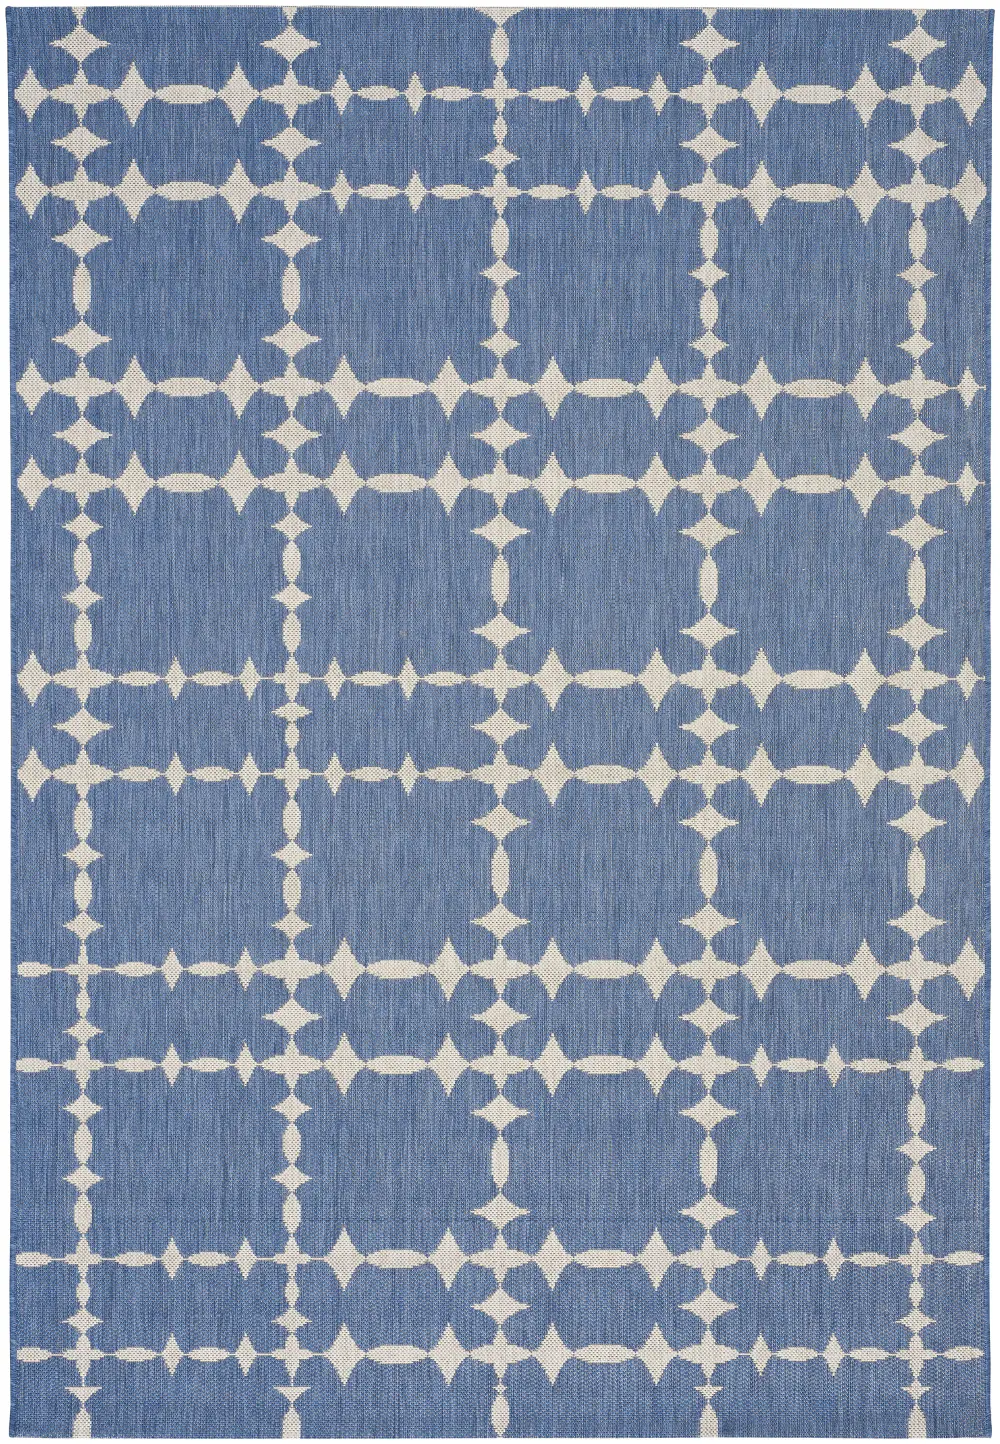 4738RS03110506440 4 x 6 Small Capri Blue Indoor-Outdoor Rug - Finesse-Tower Court-1